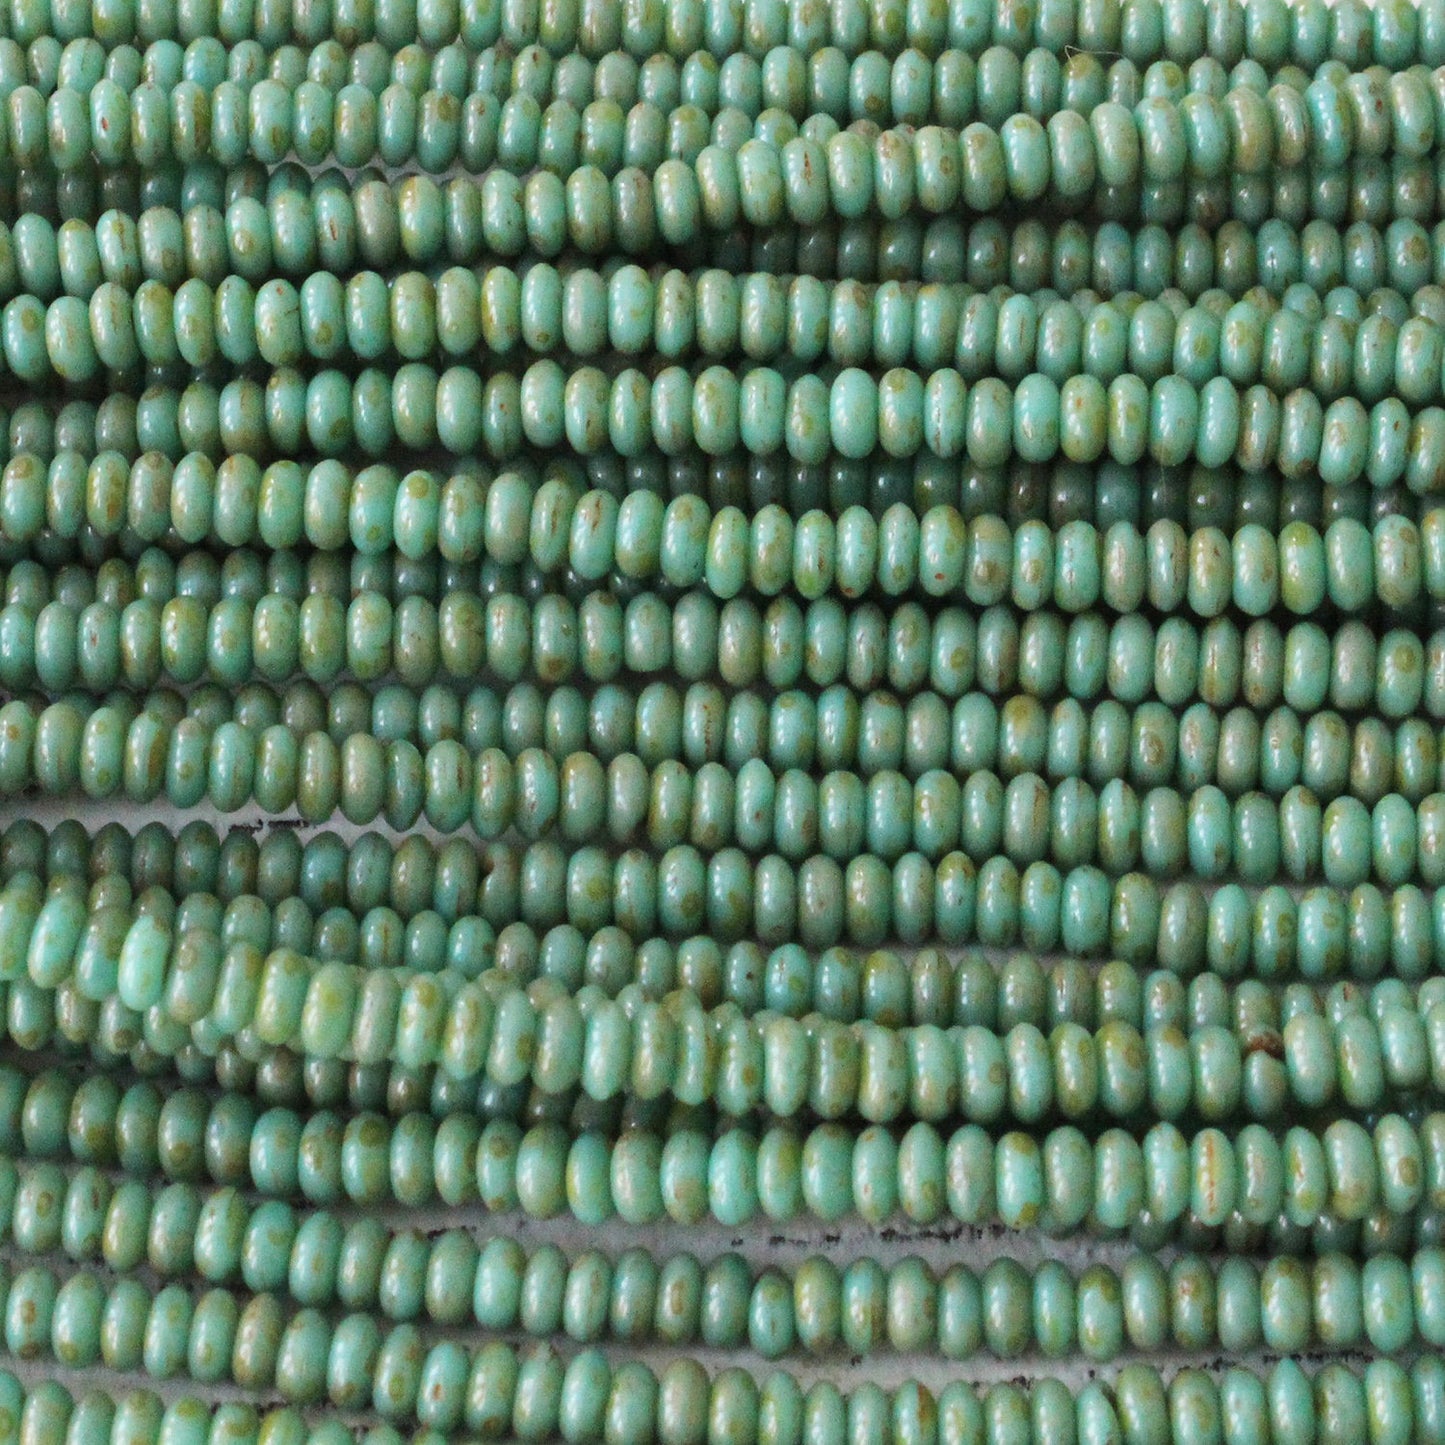 3mm Rondelle Beads -Turquoise Picasso - 100 Beads